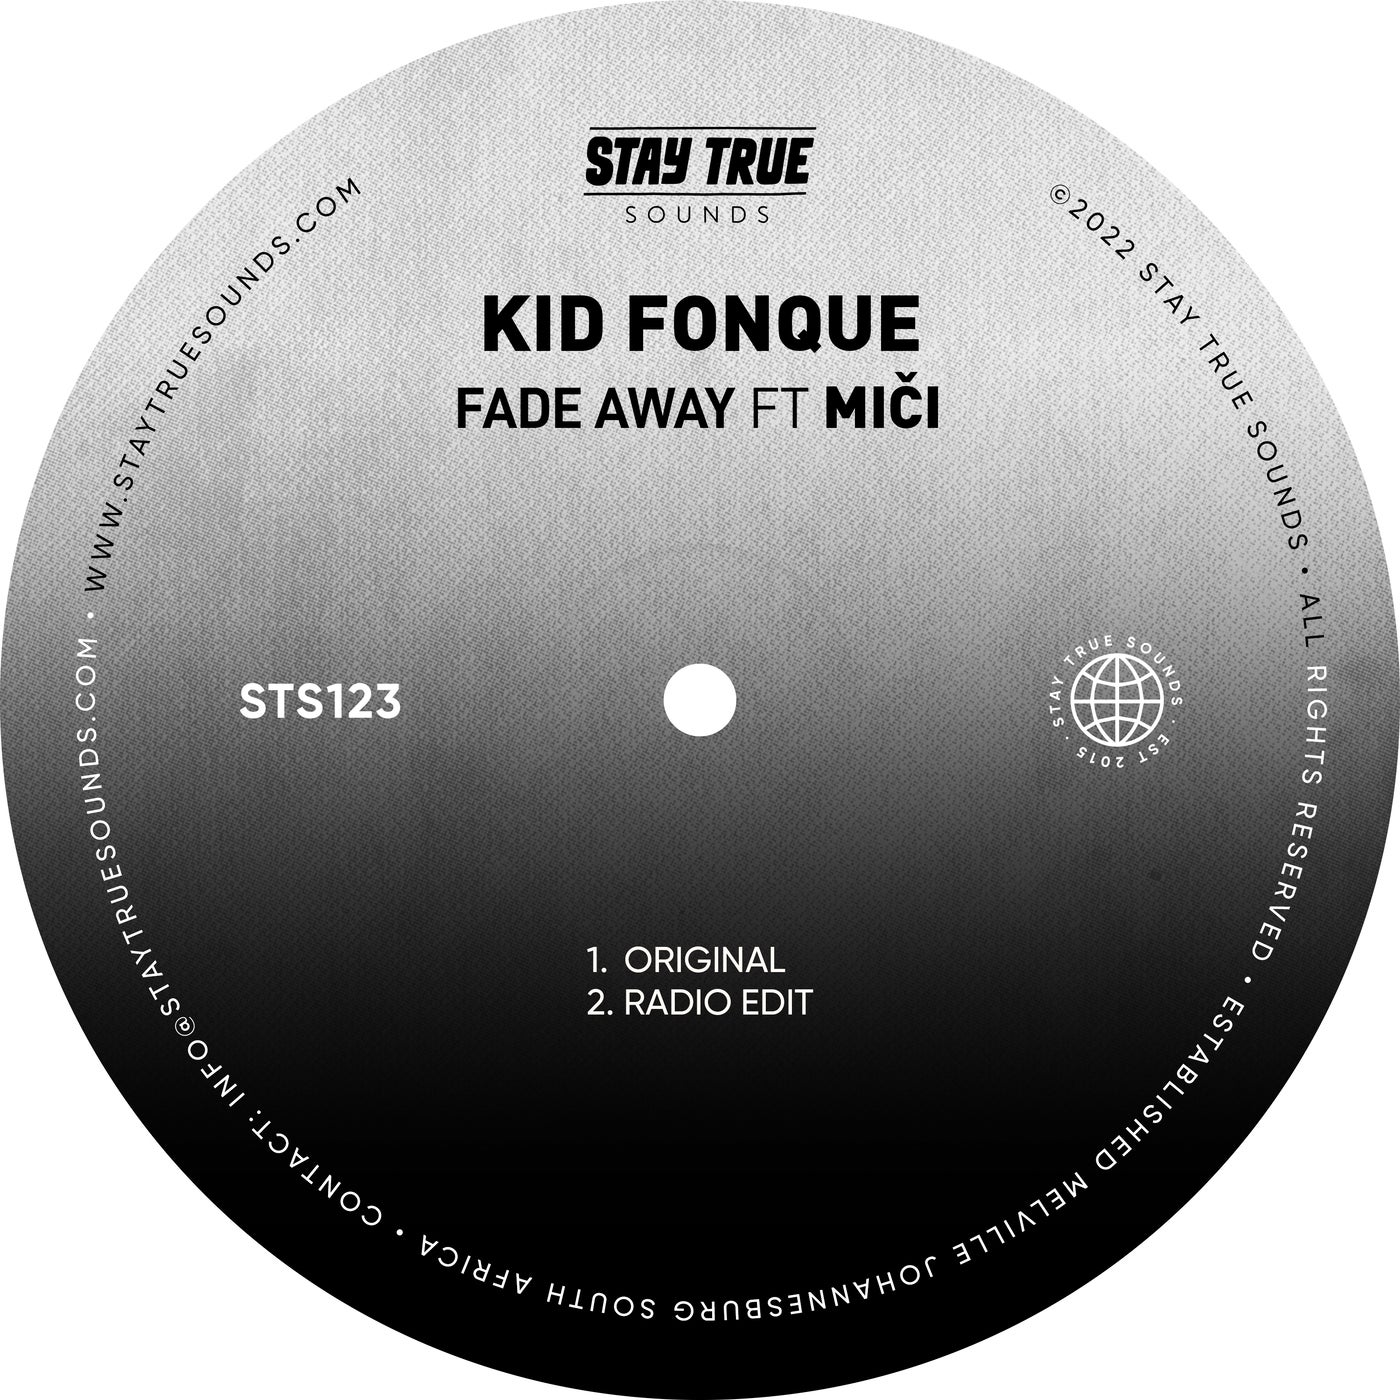 Kid Fonque - Fade Away (feat. Miči) [Stay True Sounds]